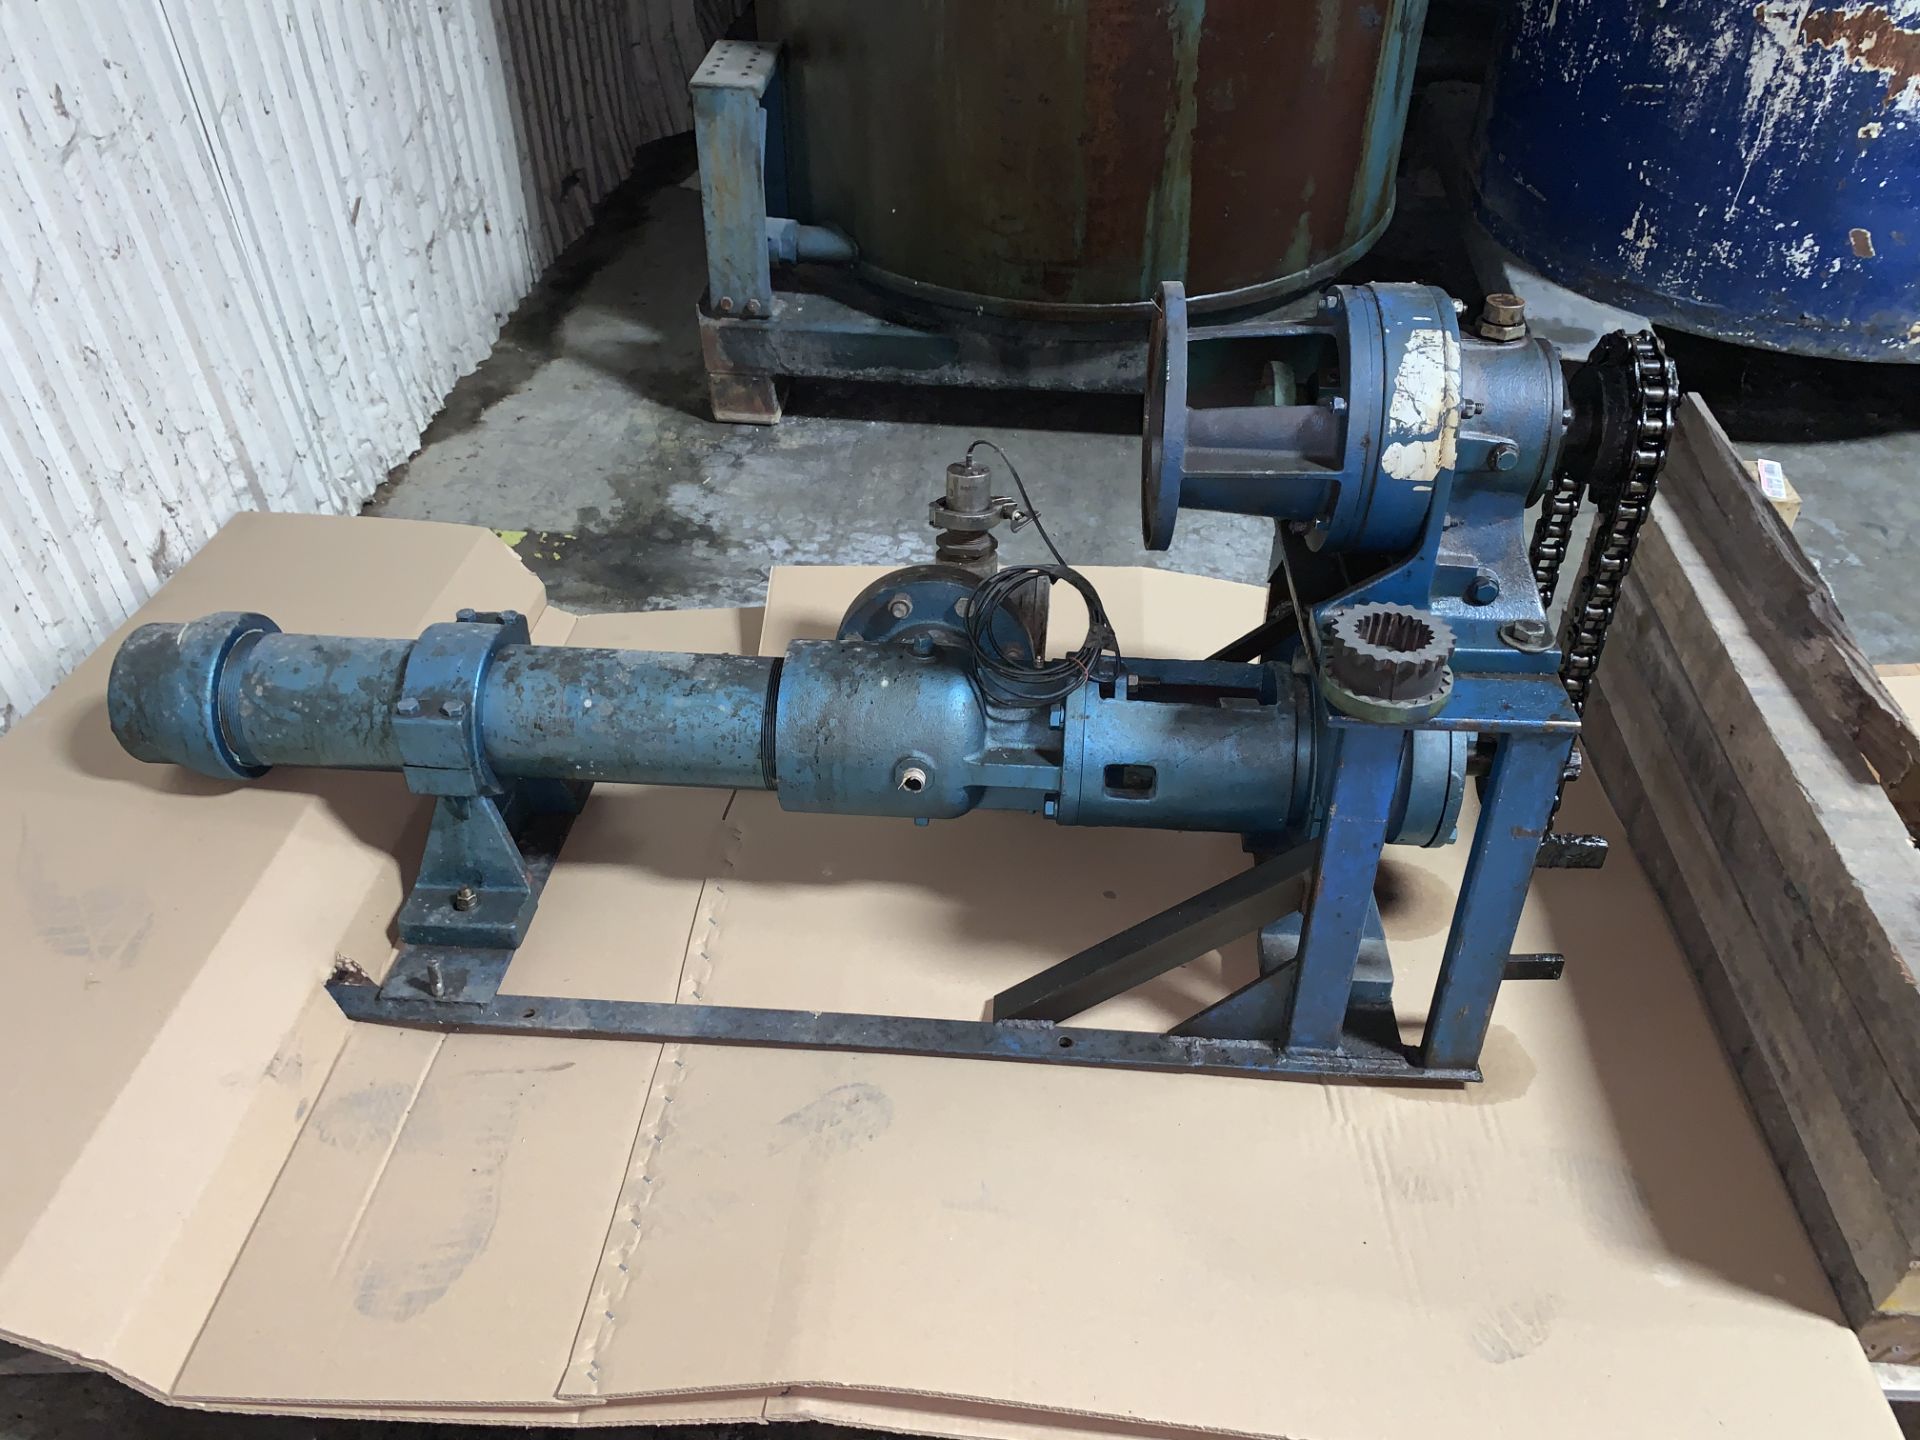 Moyno Progressive Cavity Pump (was used for pumping syrup) Cyclo Gear Box and Chain Drive Speed